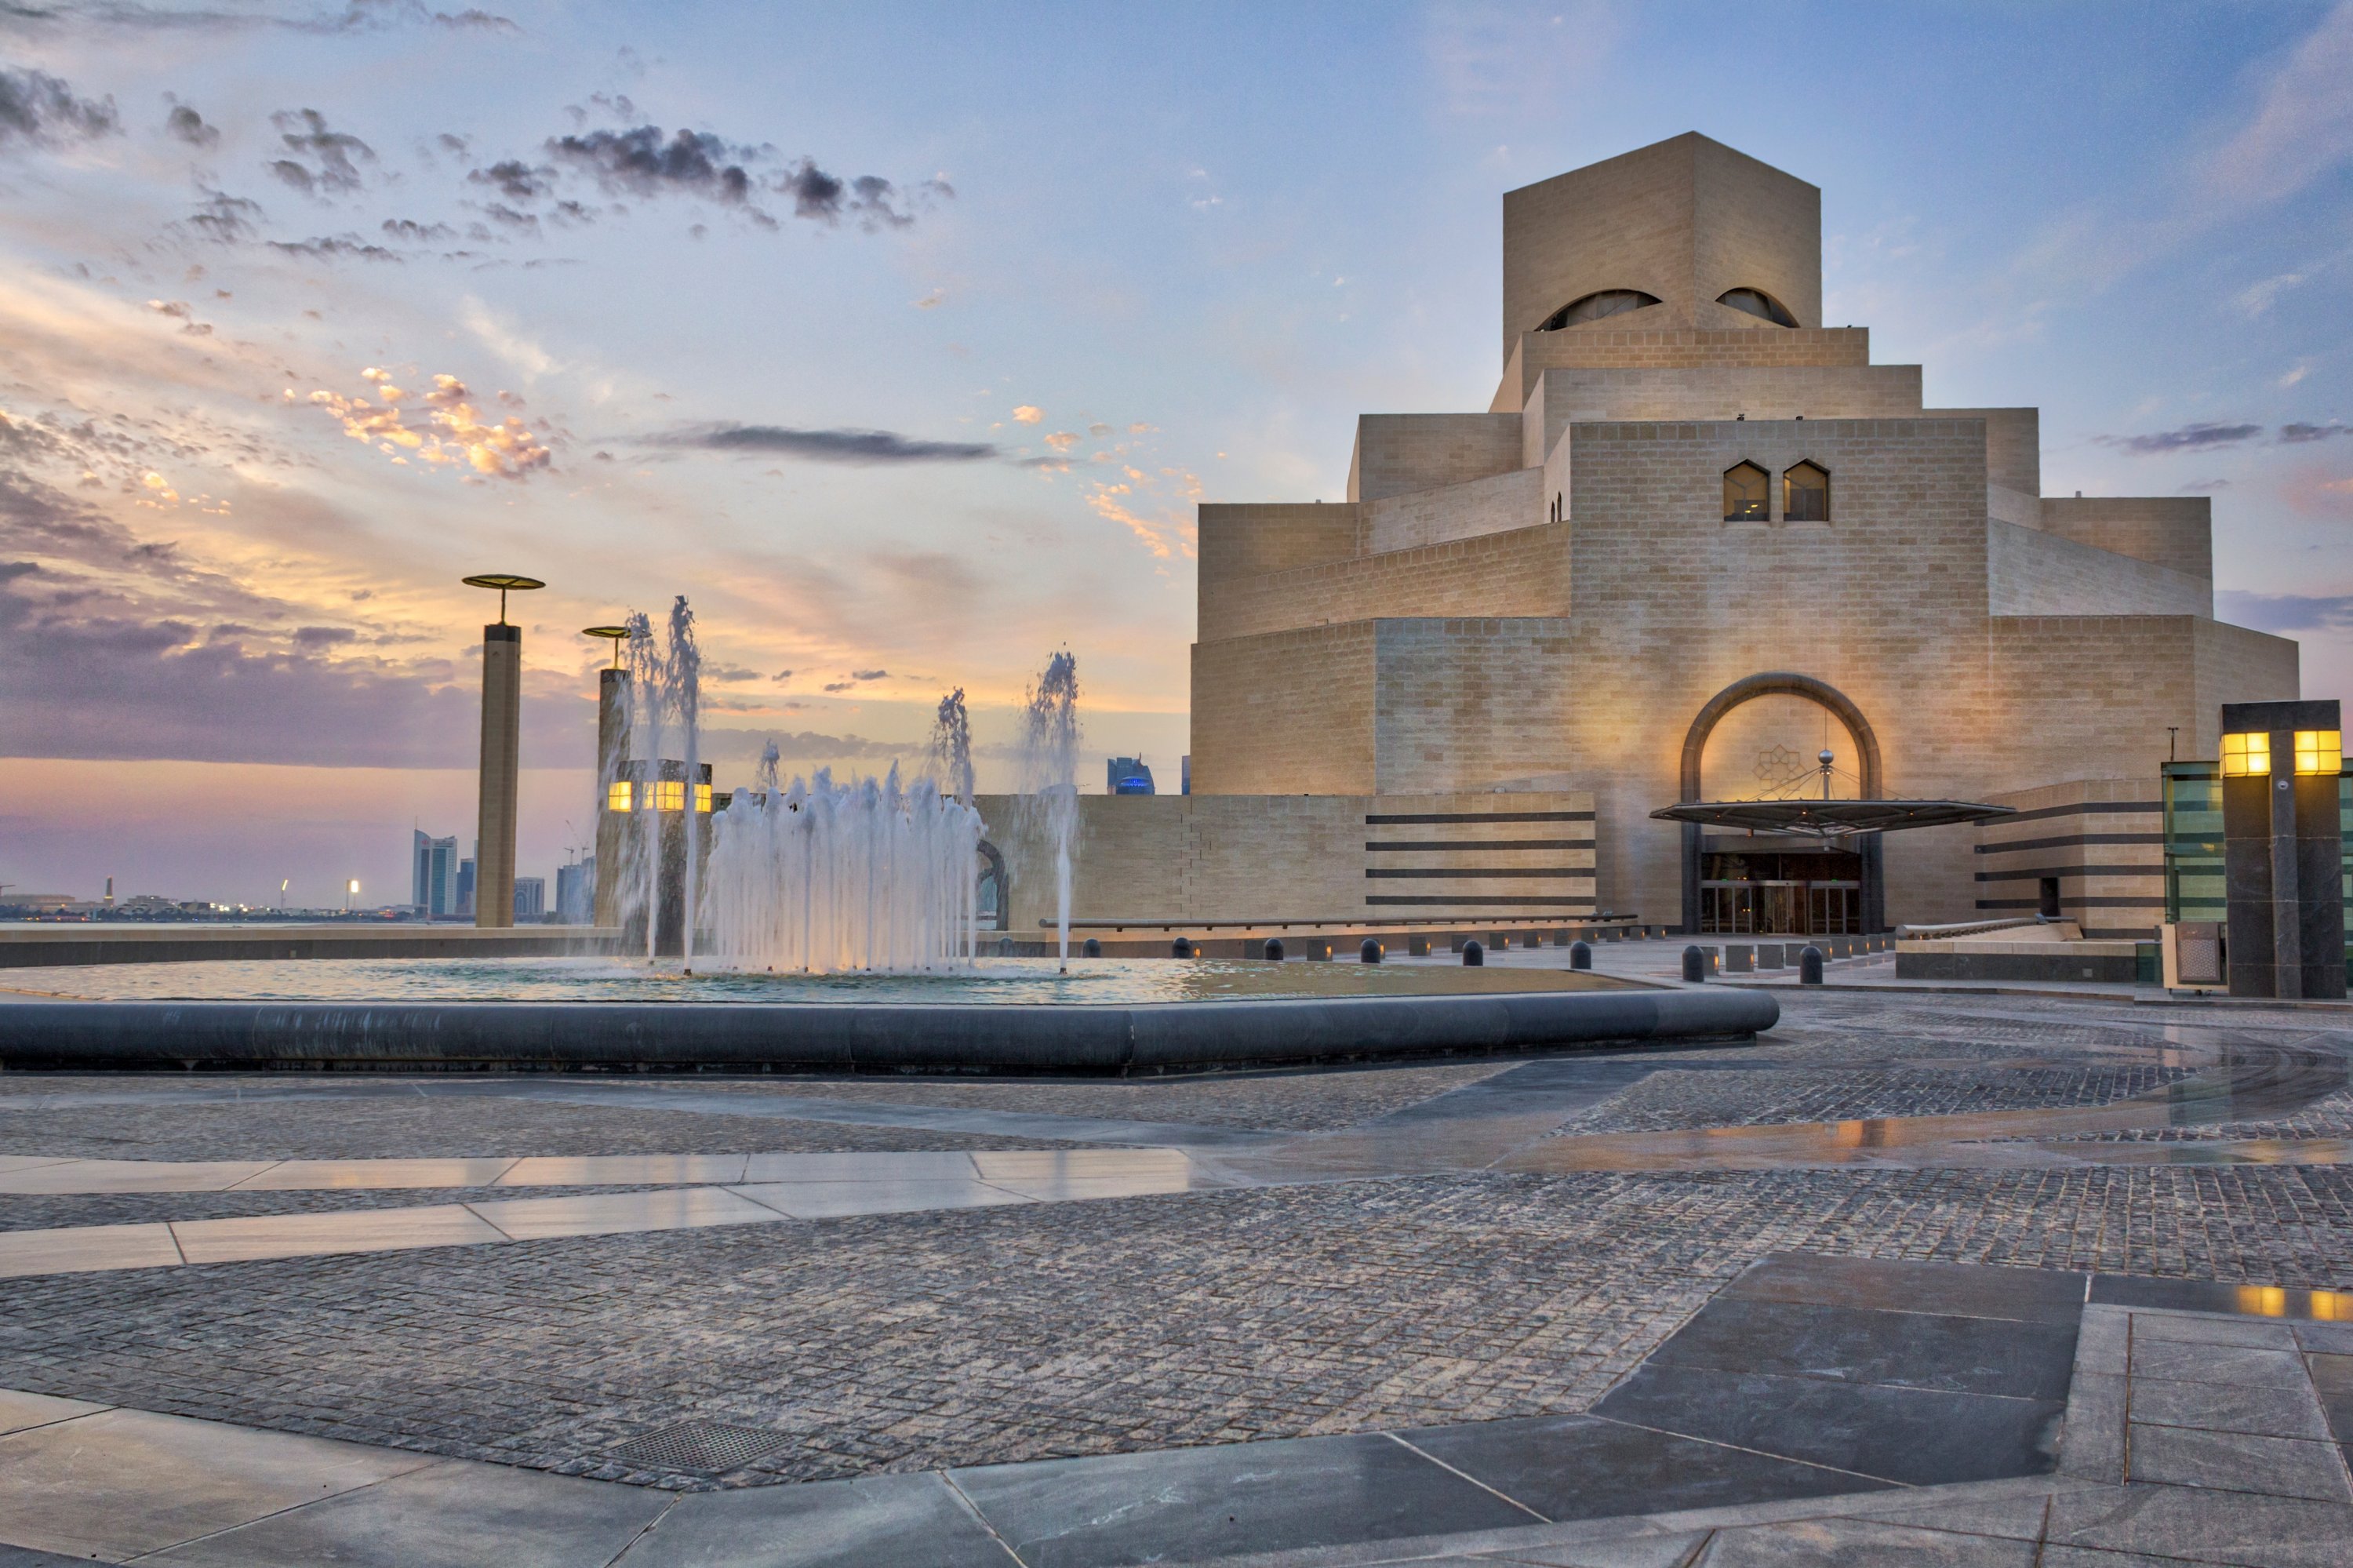 Must-see museums of Qatar blend artistic, architectural beauty | Daily Sabah